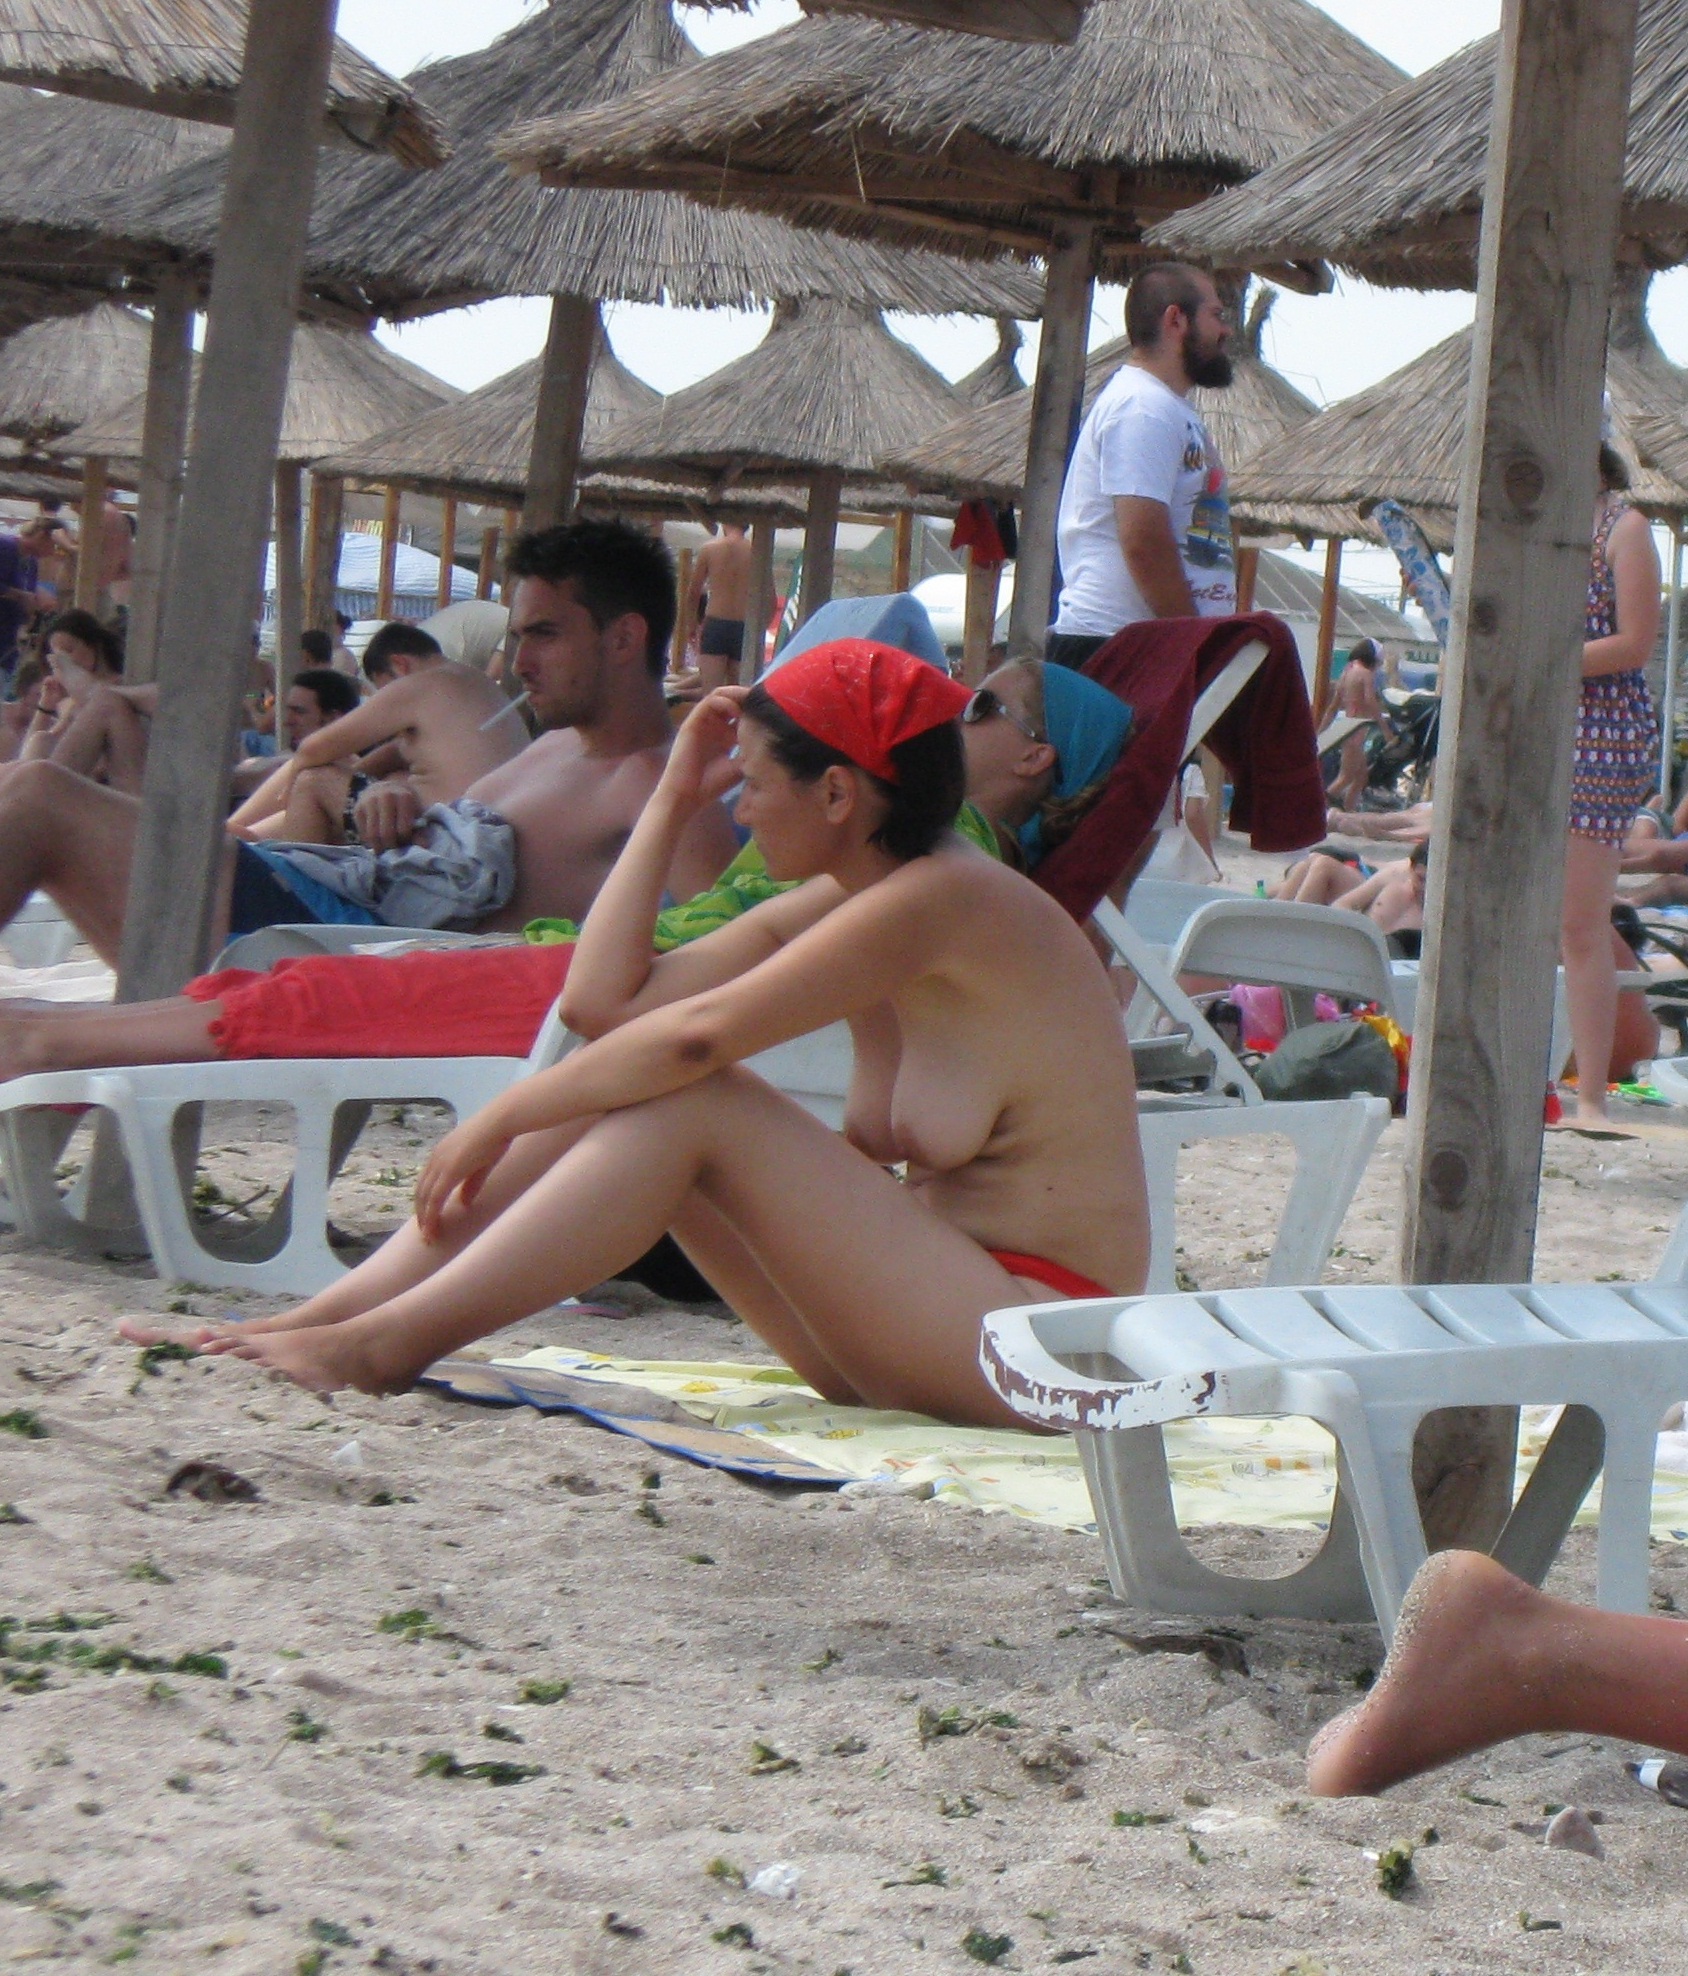 Dark haired chick with a red kerchief sitting topless under the parasol